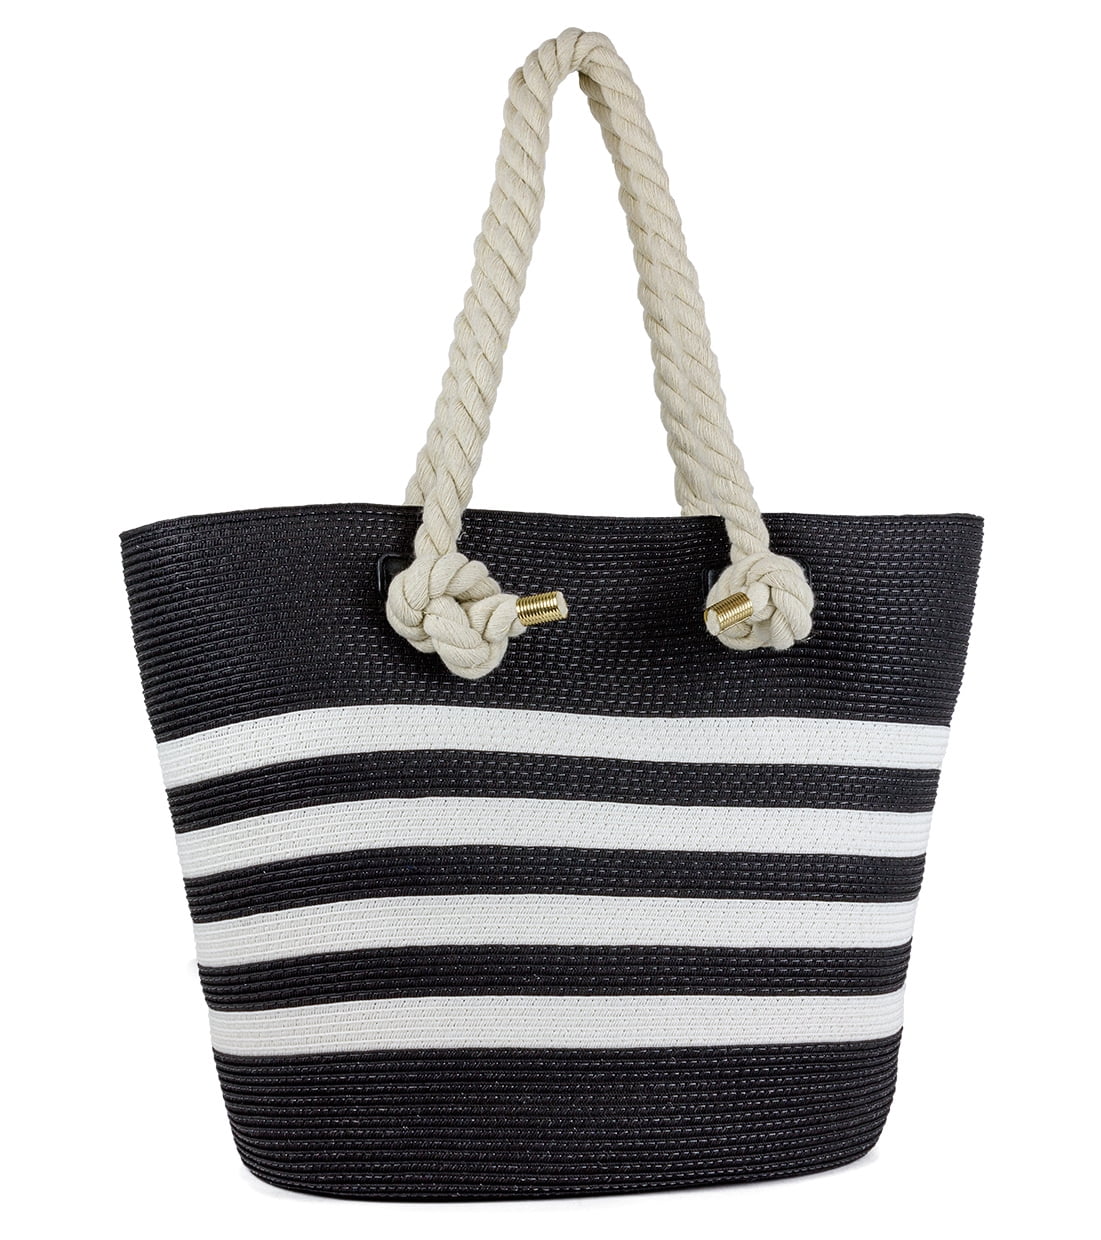 Magid - MAGID WOMEN'S STRIPED BLACK AND WHITE PAPER STRAW TOTE BAG WITH ...